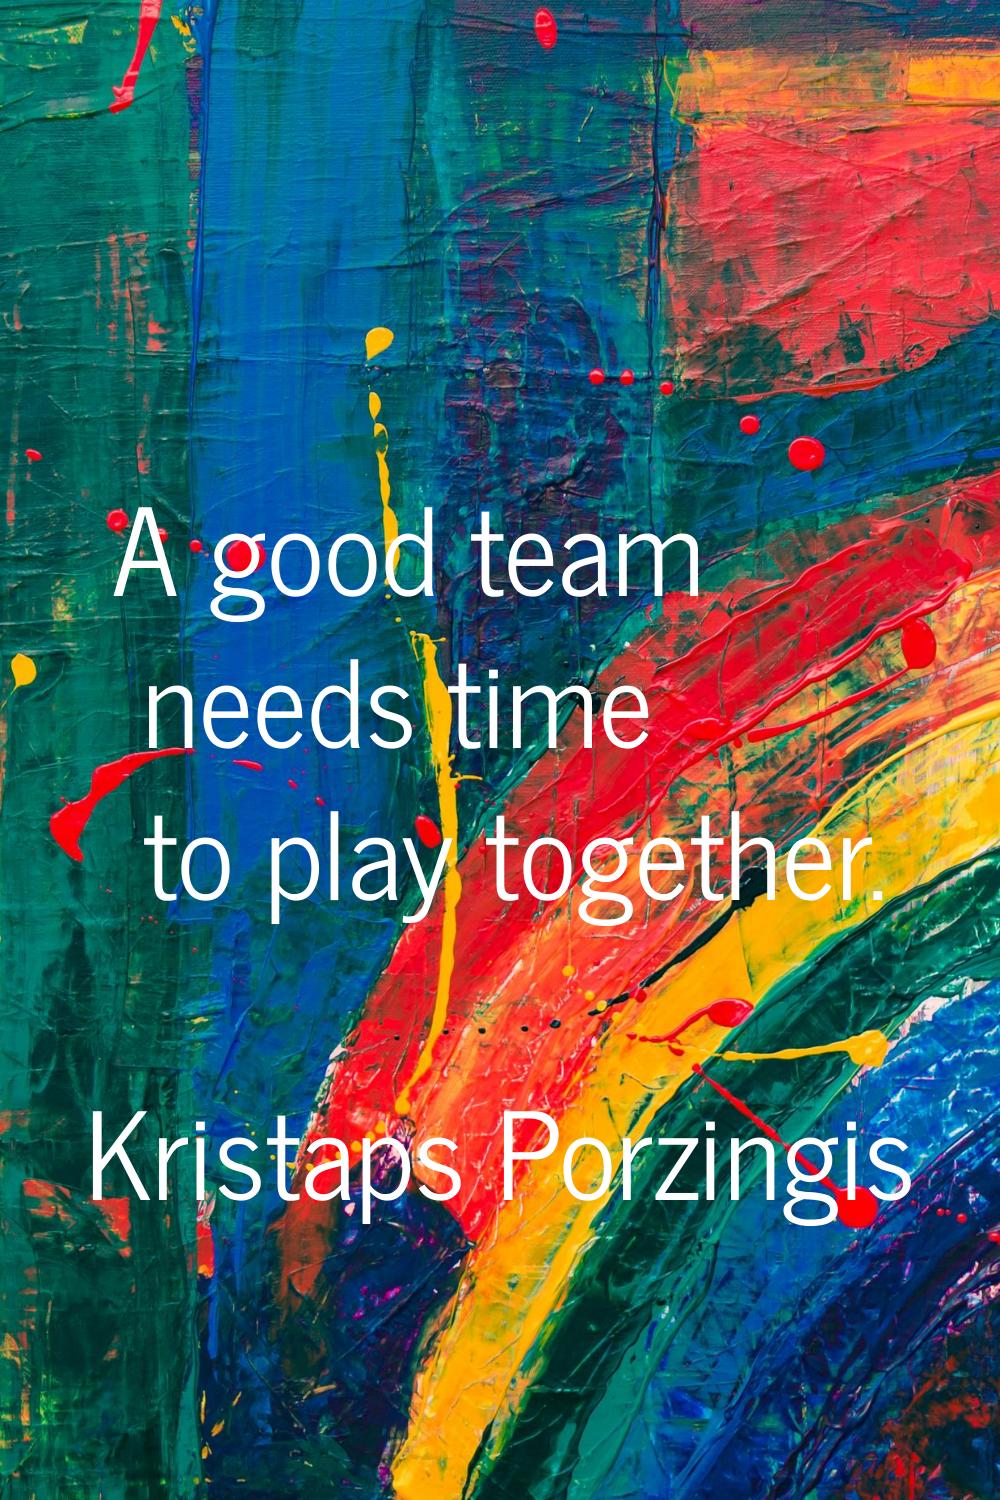 A good team needs time to play together.